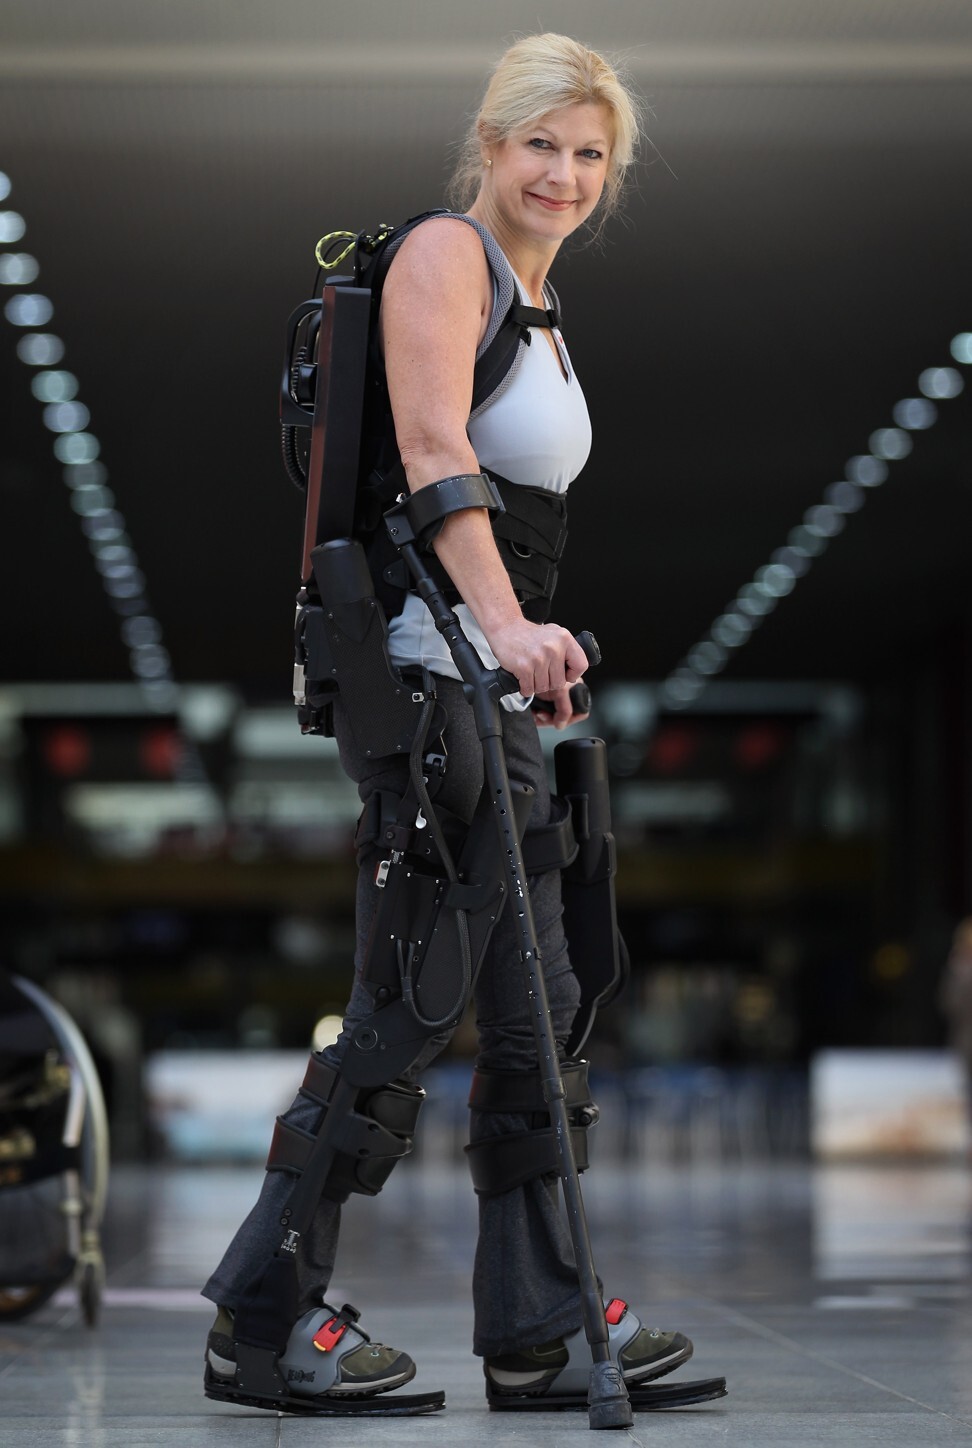 Amanda Boxtel, who is paralysed, shows off a device developed by Ekso Bionics that helps people walk. Photo: Getty Images